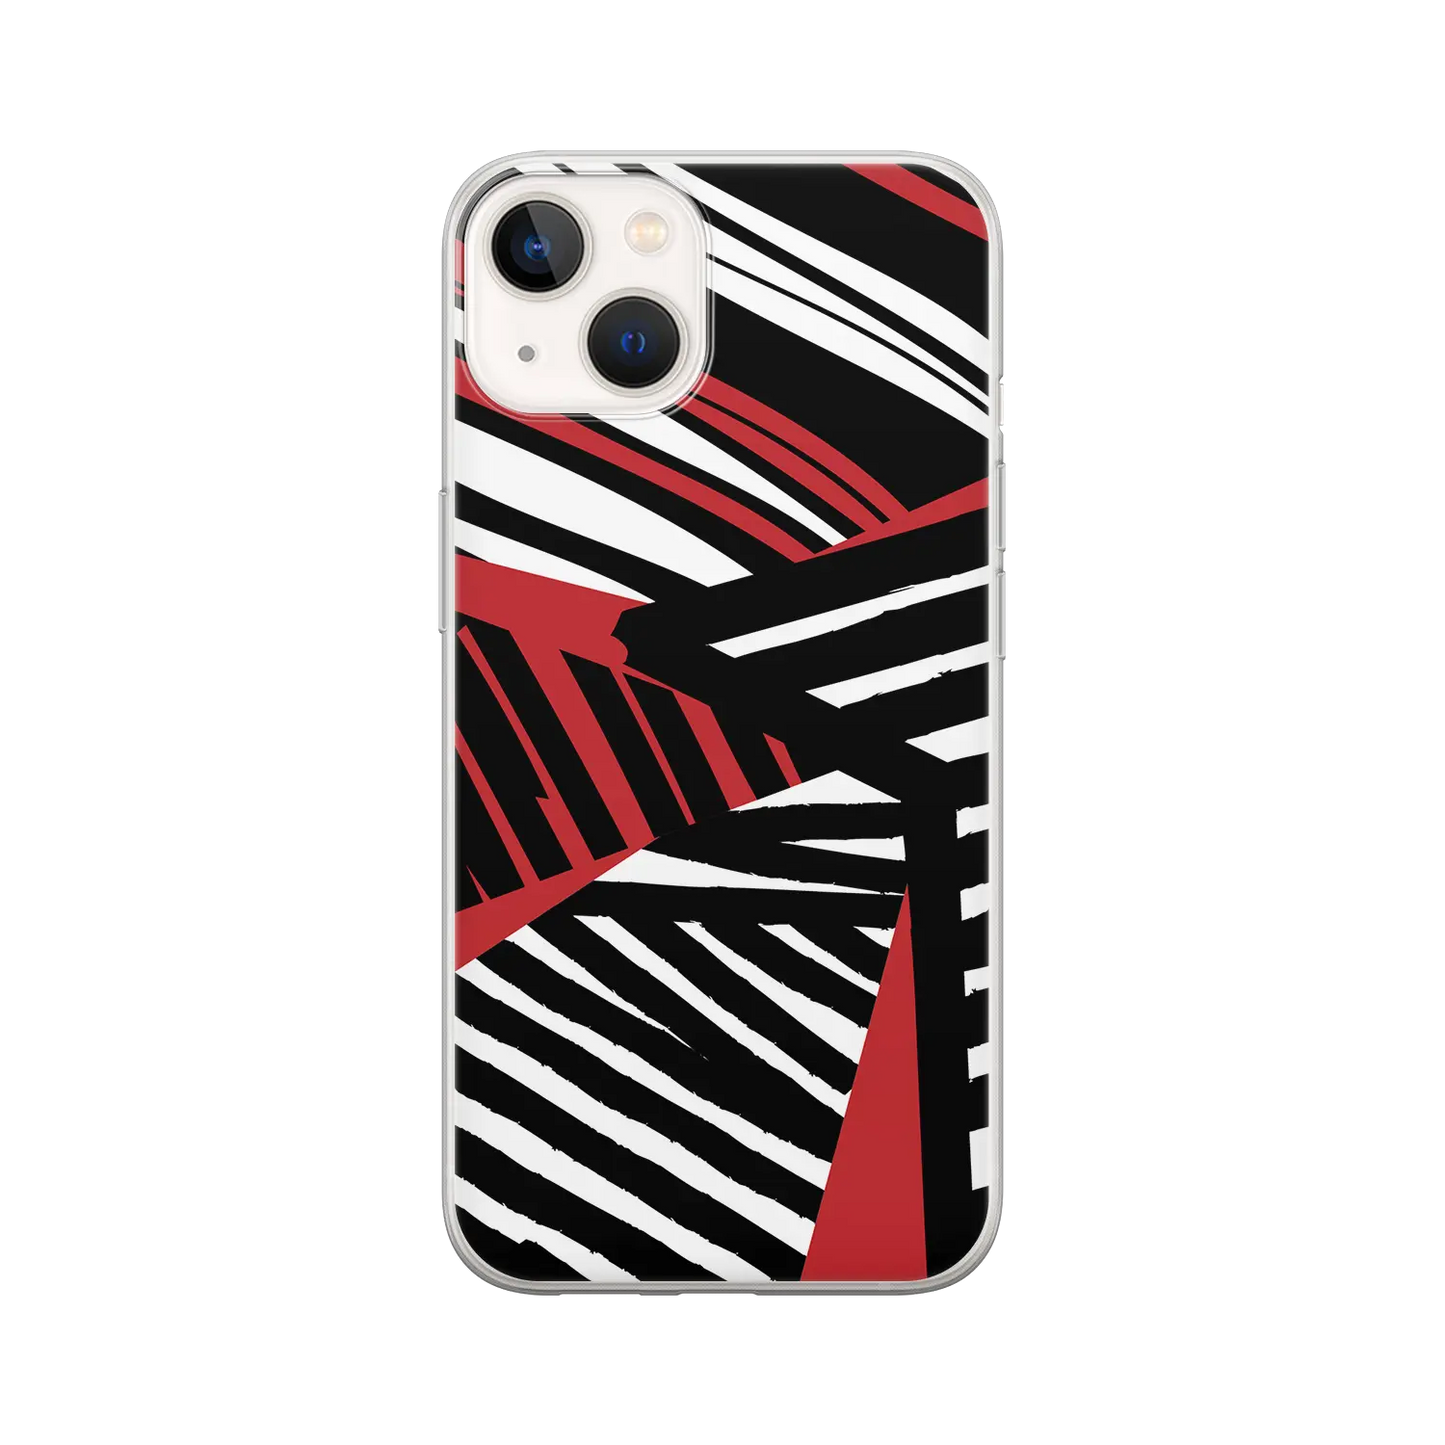 Rayures - Coque iPhone Personnalisée